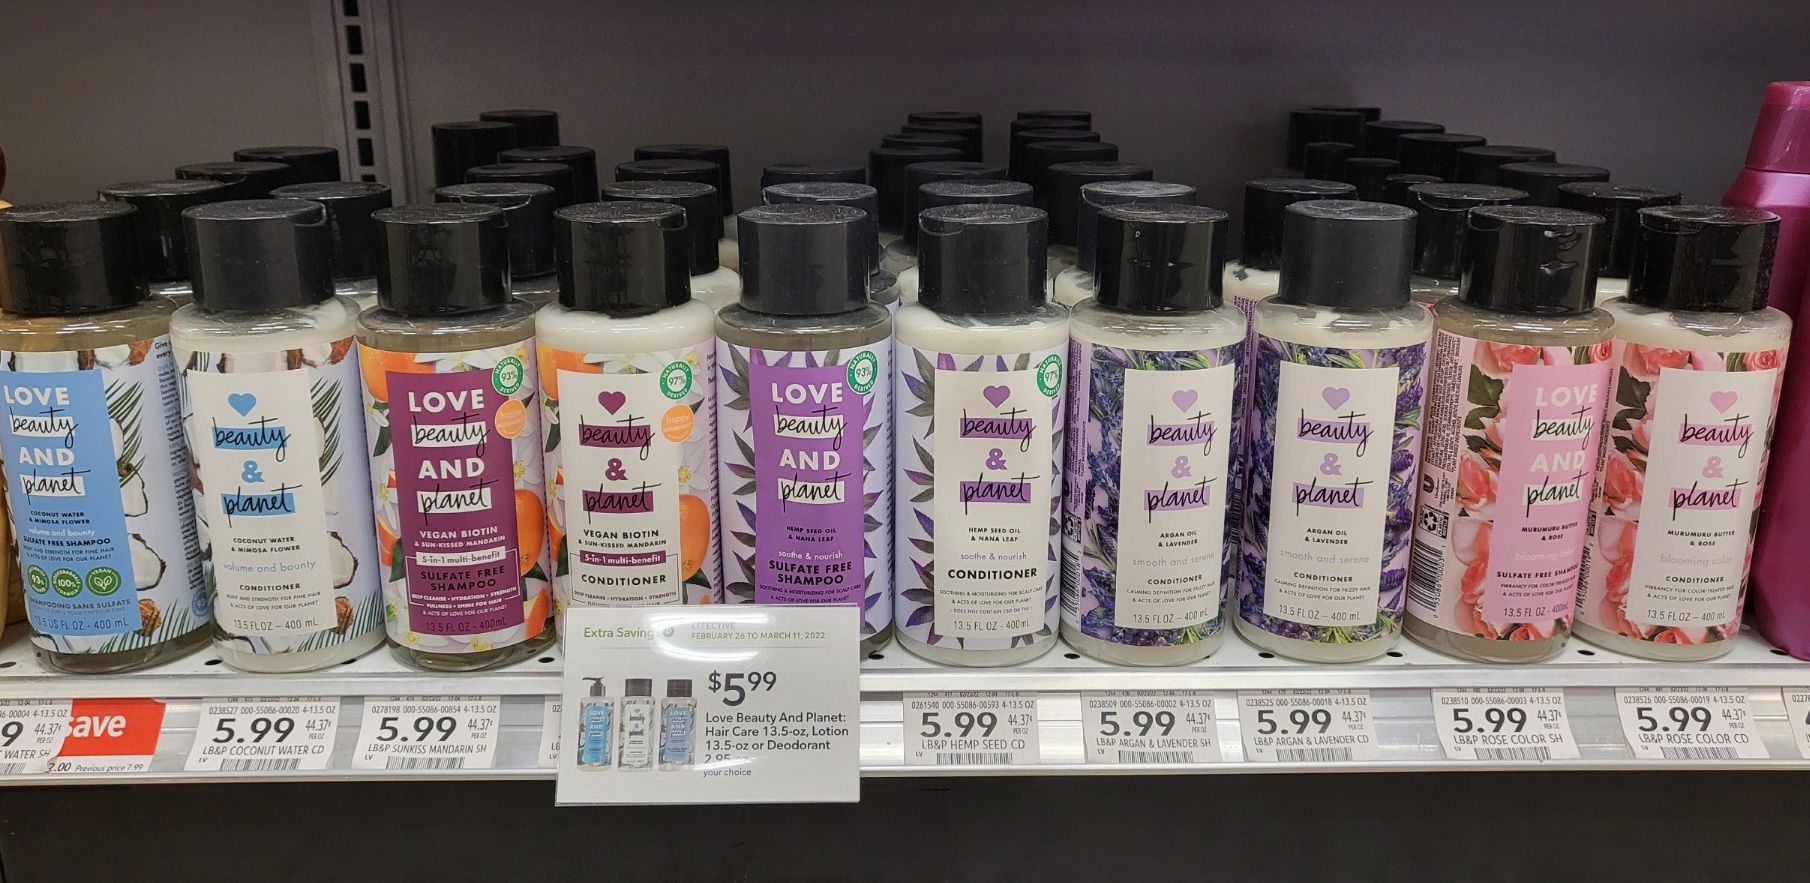 Love Beauty and Planet Products As Low As $3 At Publix (Regular Price $7.99) on I Heart Publix